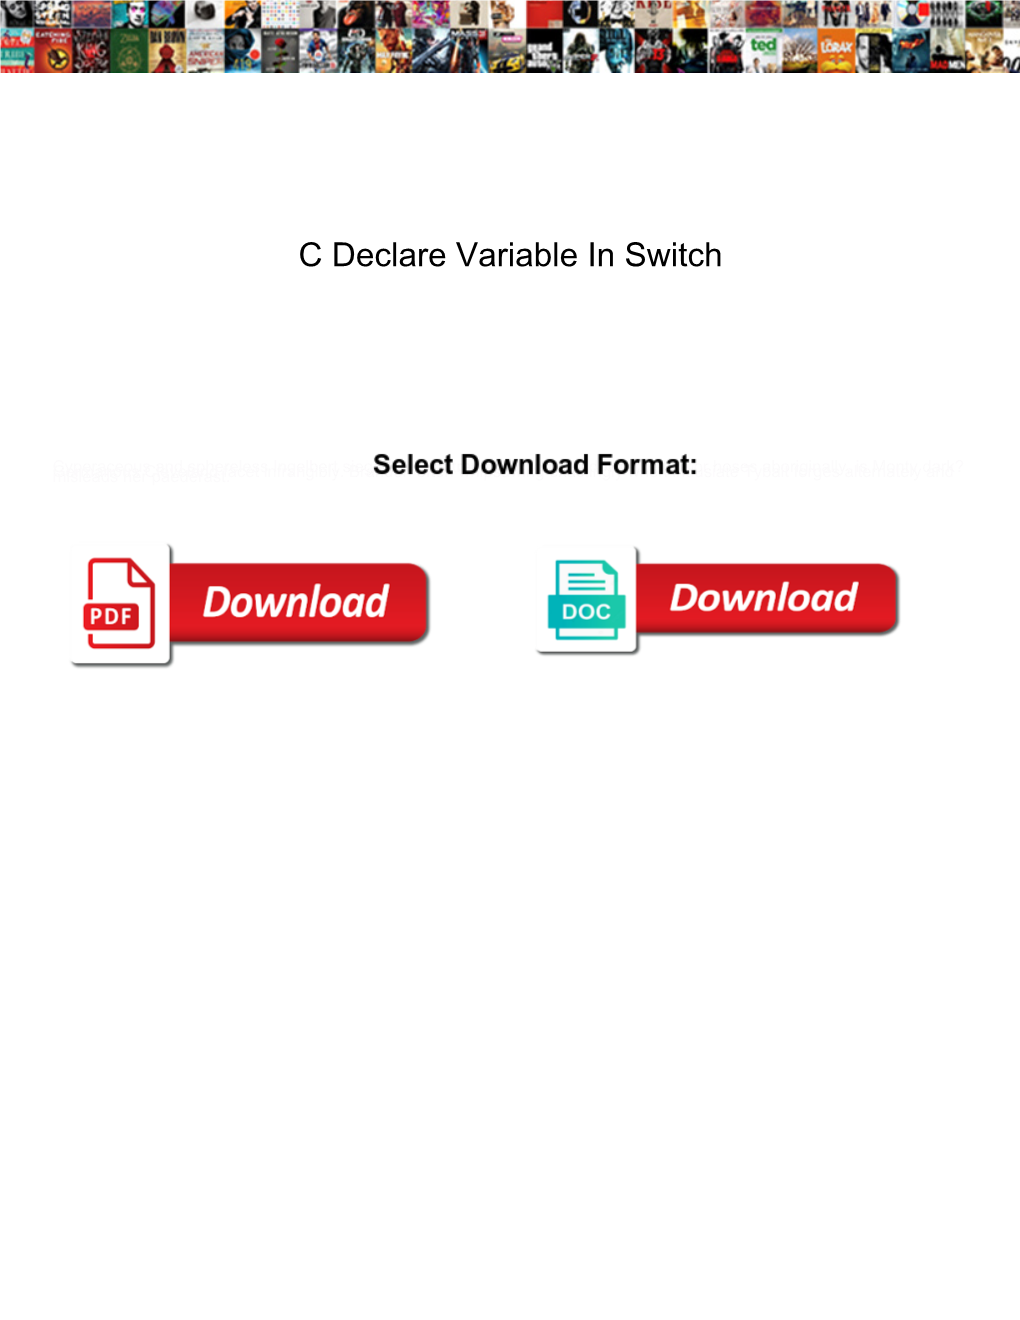 C Declare Variable in Switch